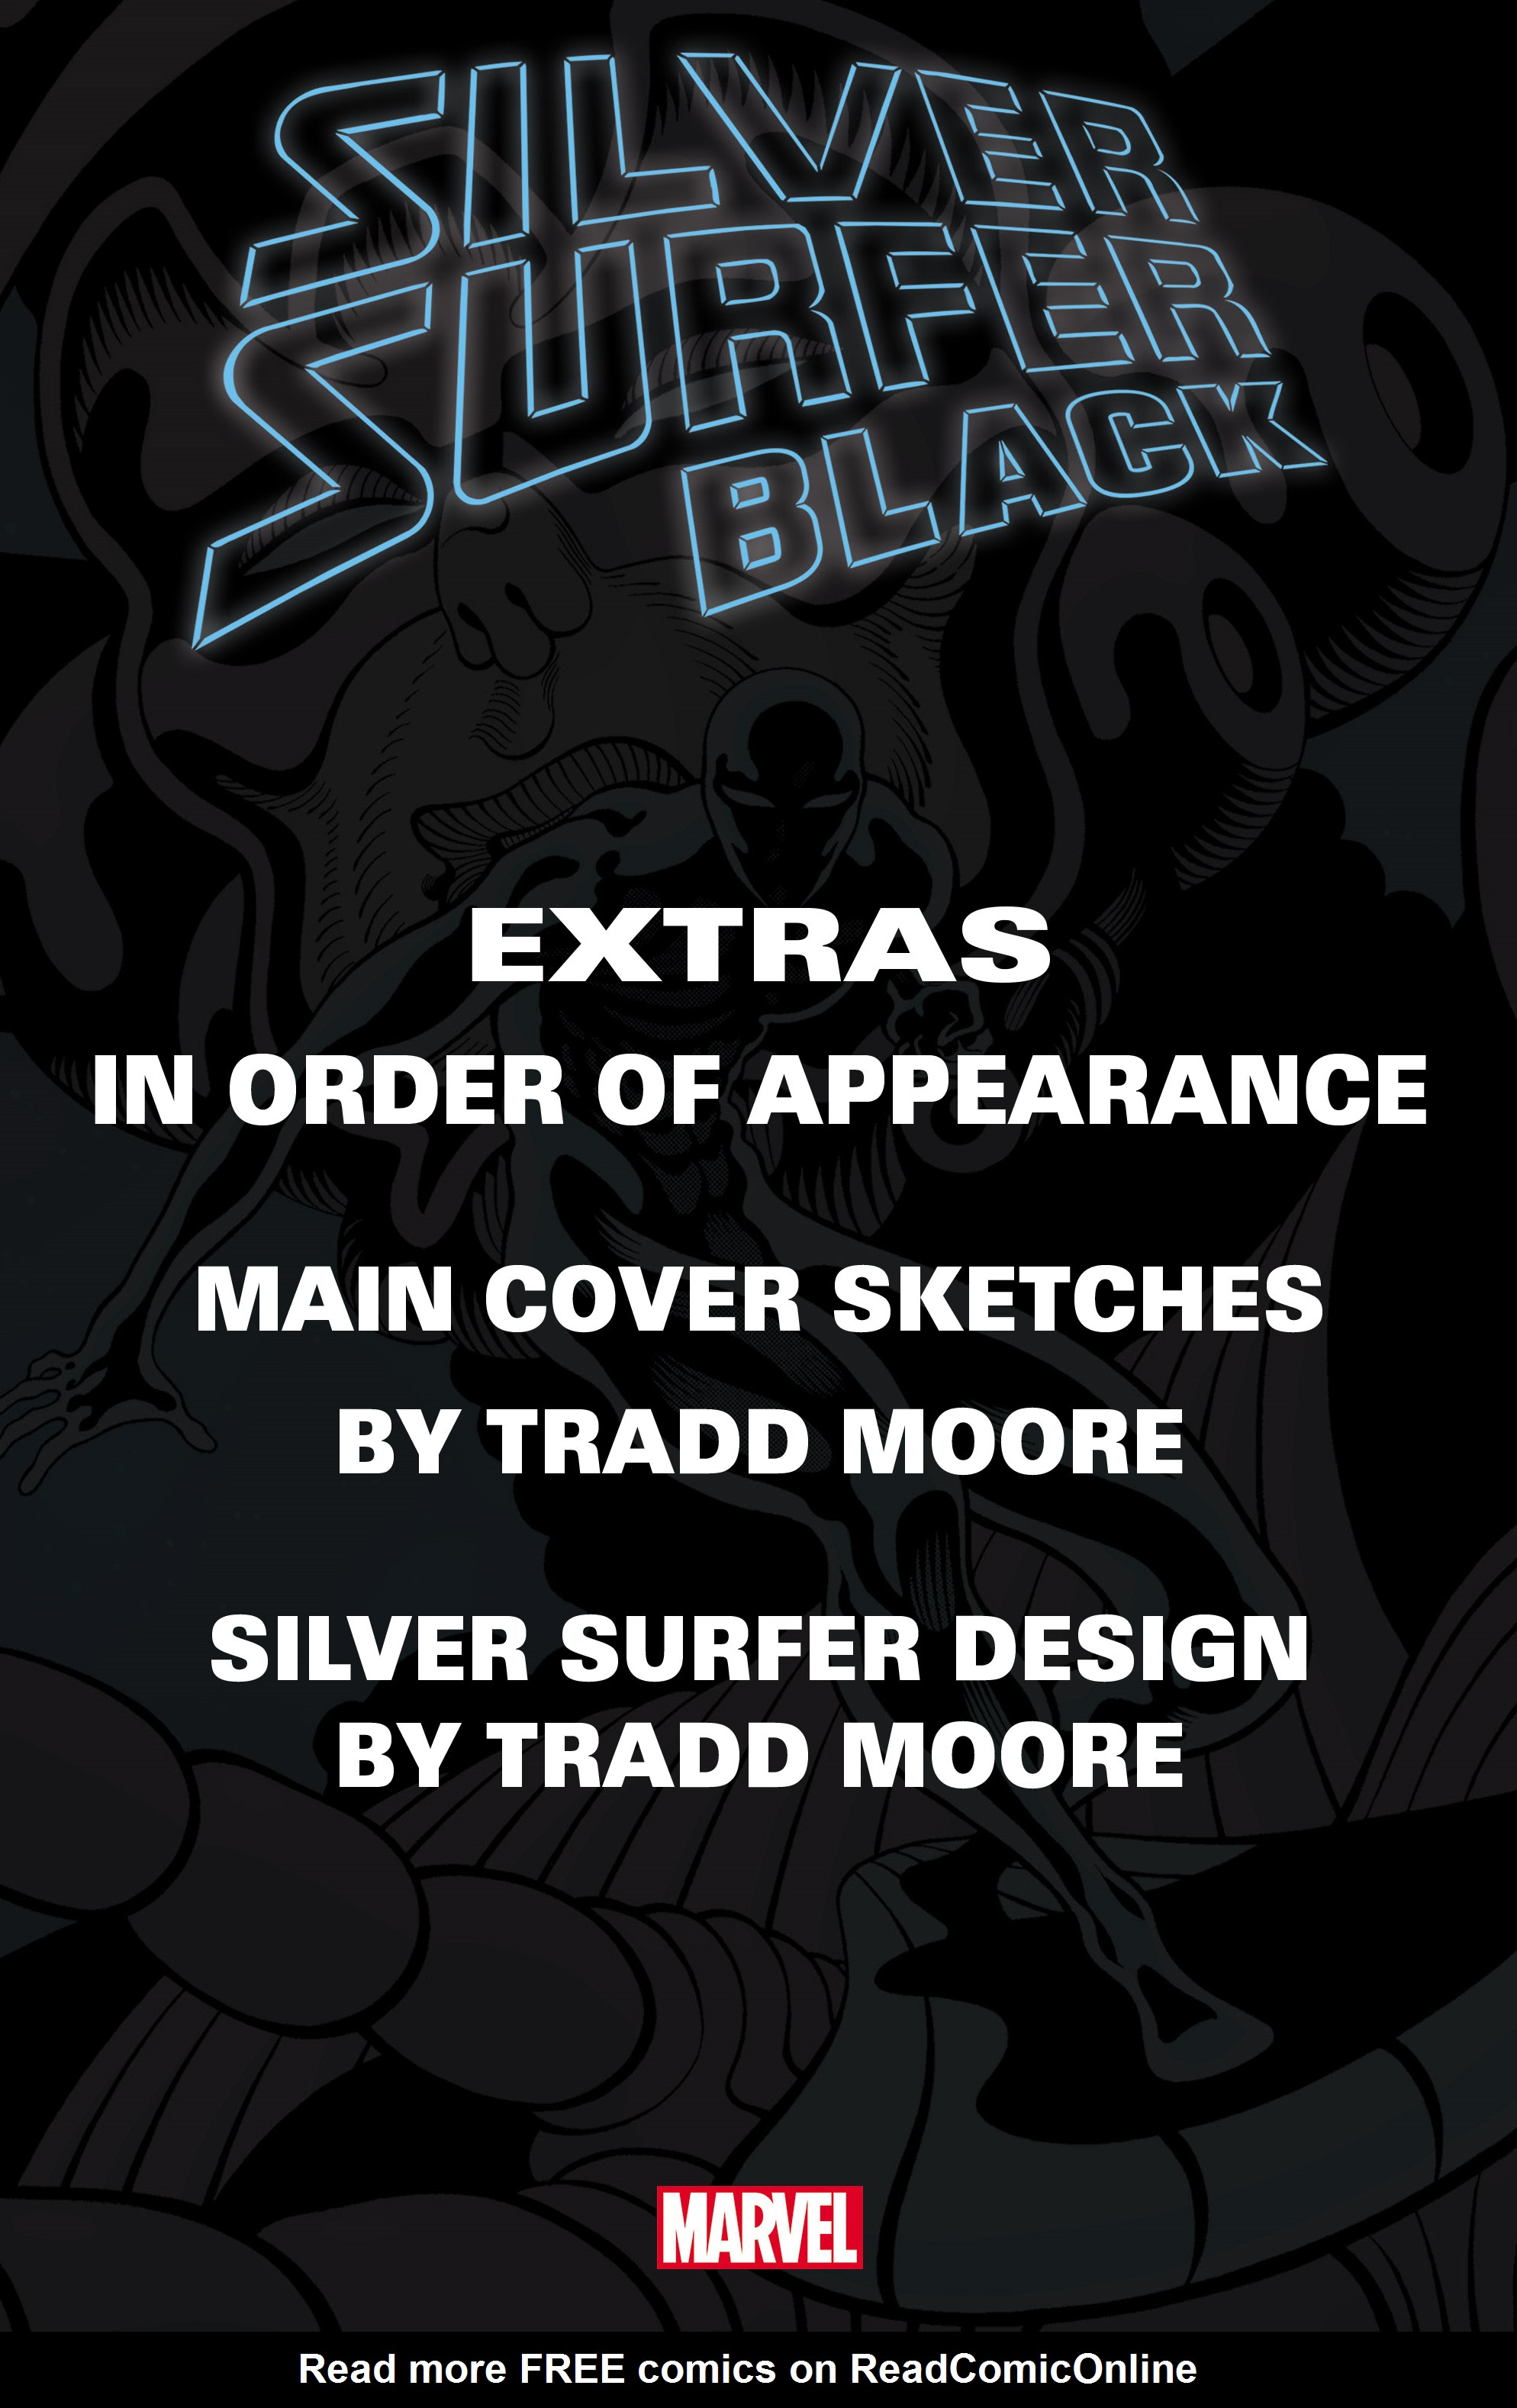 Read online Silver Surfer: Black comic -  Issue # _Director_s_Cut - 108